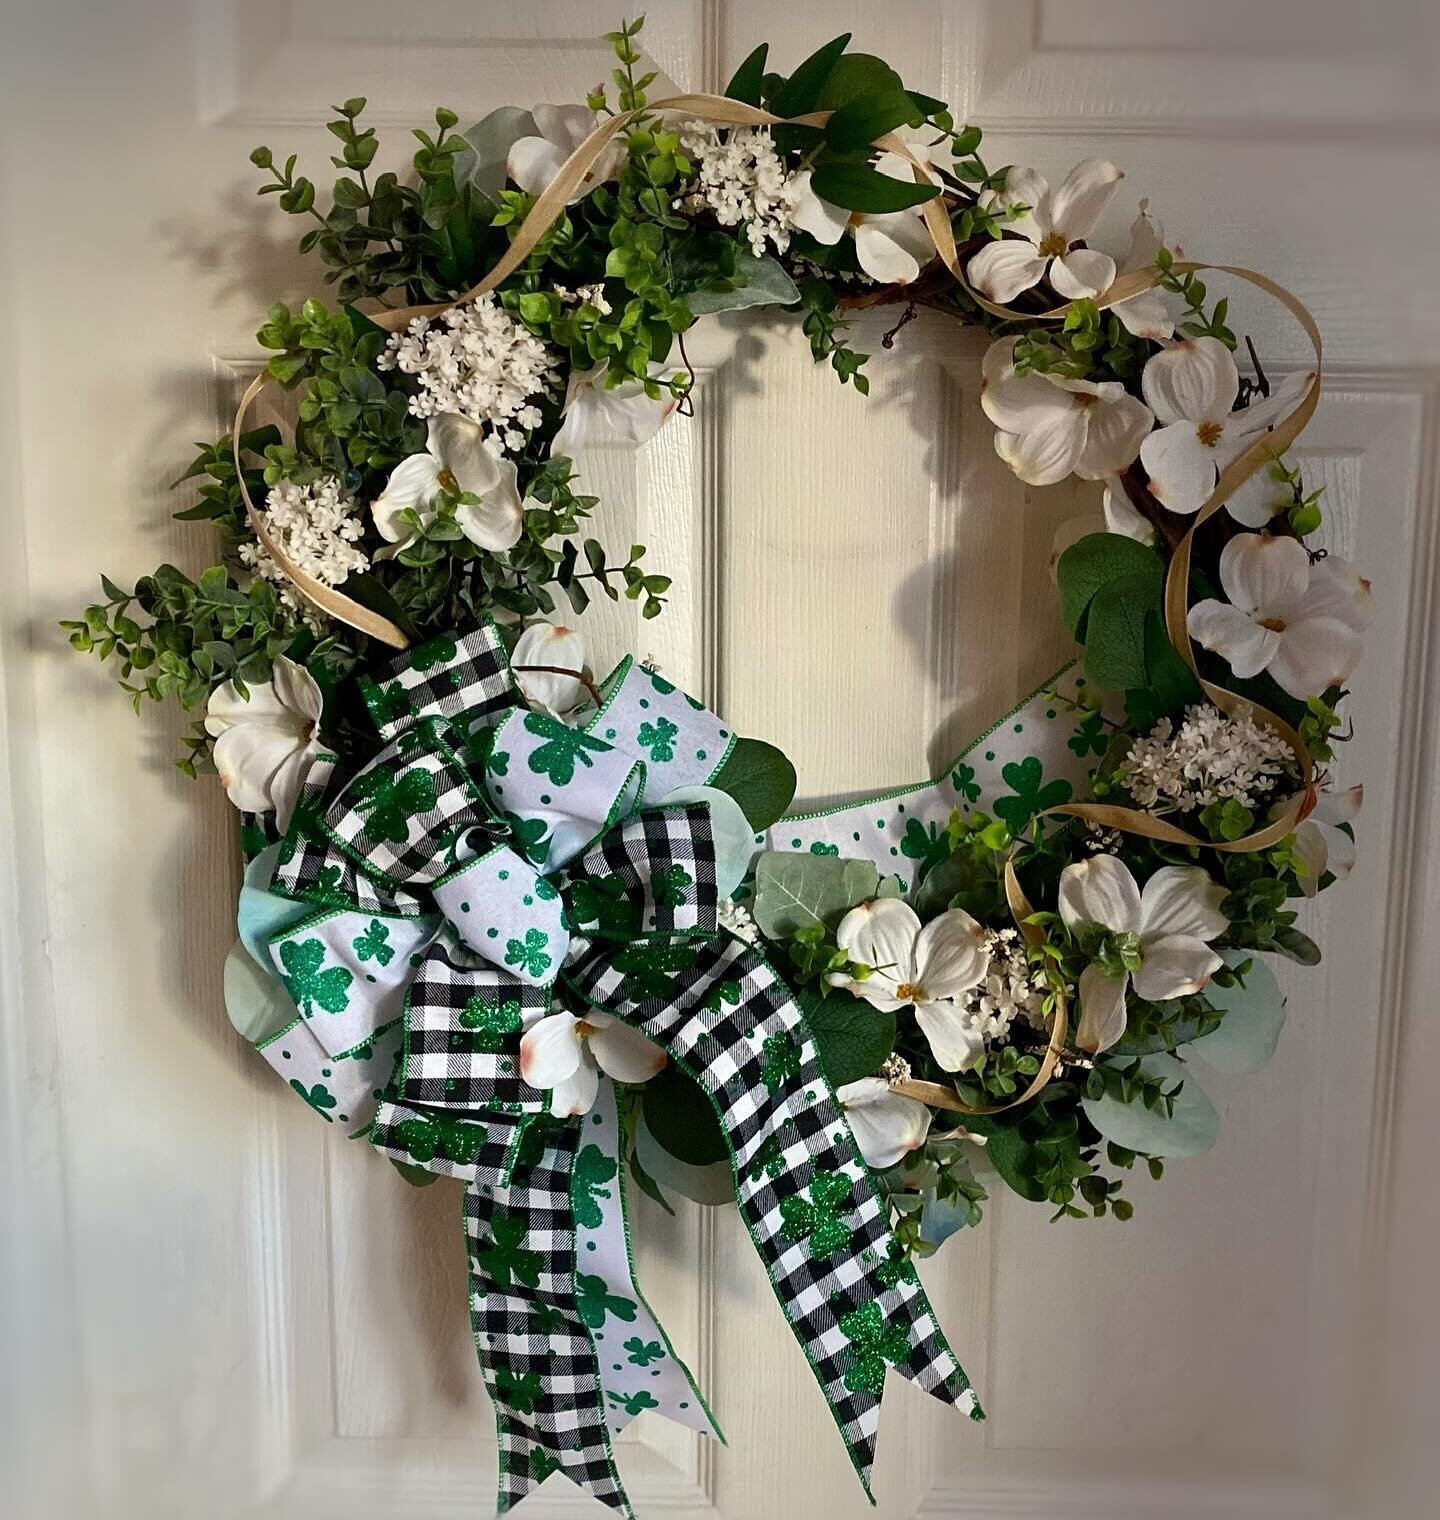 Gearing up for St. Patrick&rsquo;s day with this beautiful wreath! This is a custom order that I absolutely loved making 💚🍀 #smallbusiness #customwreath #stpatricksday